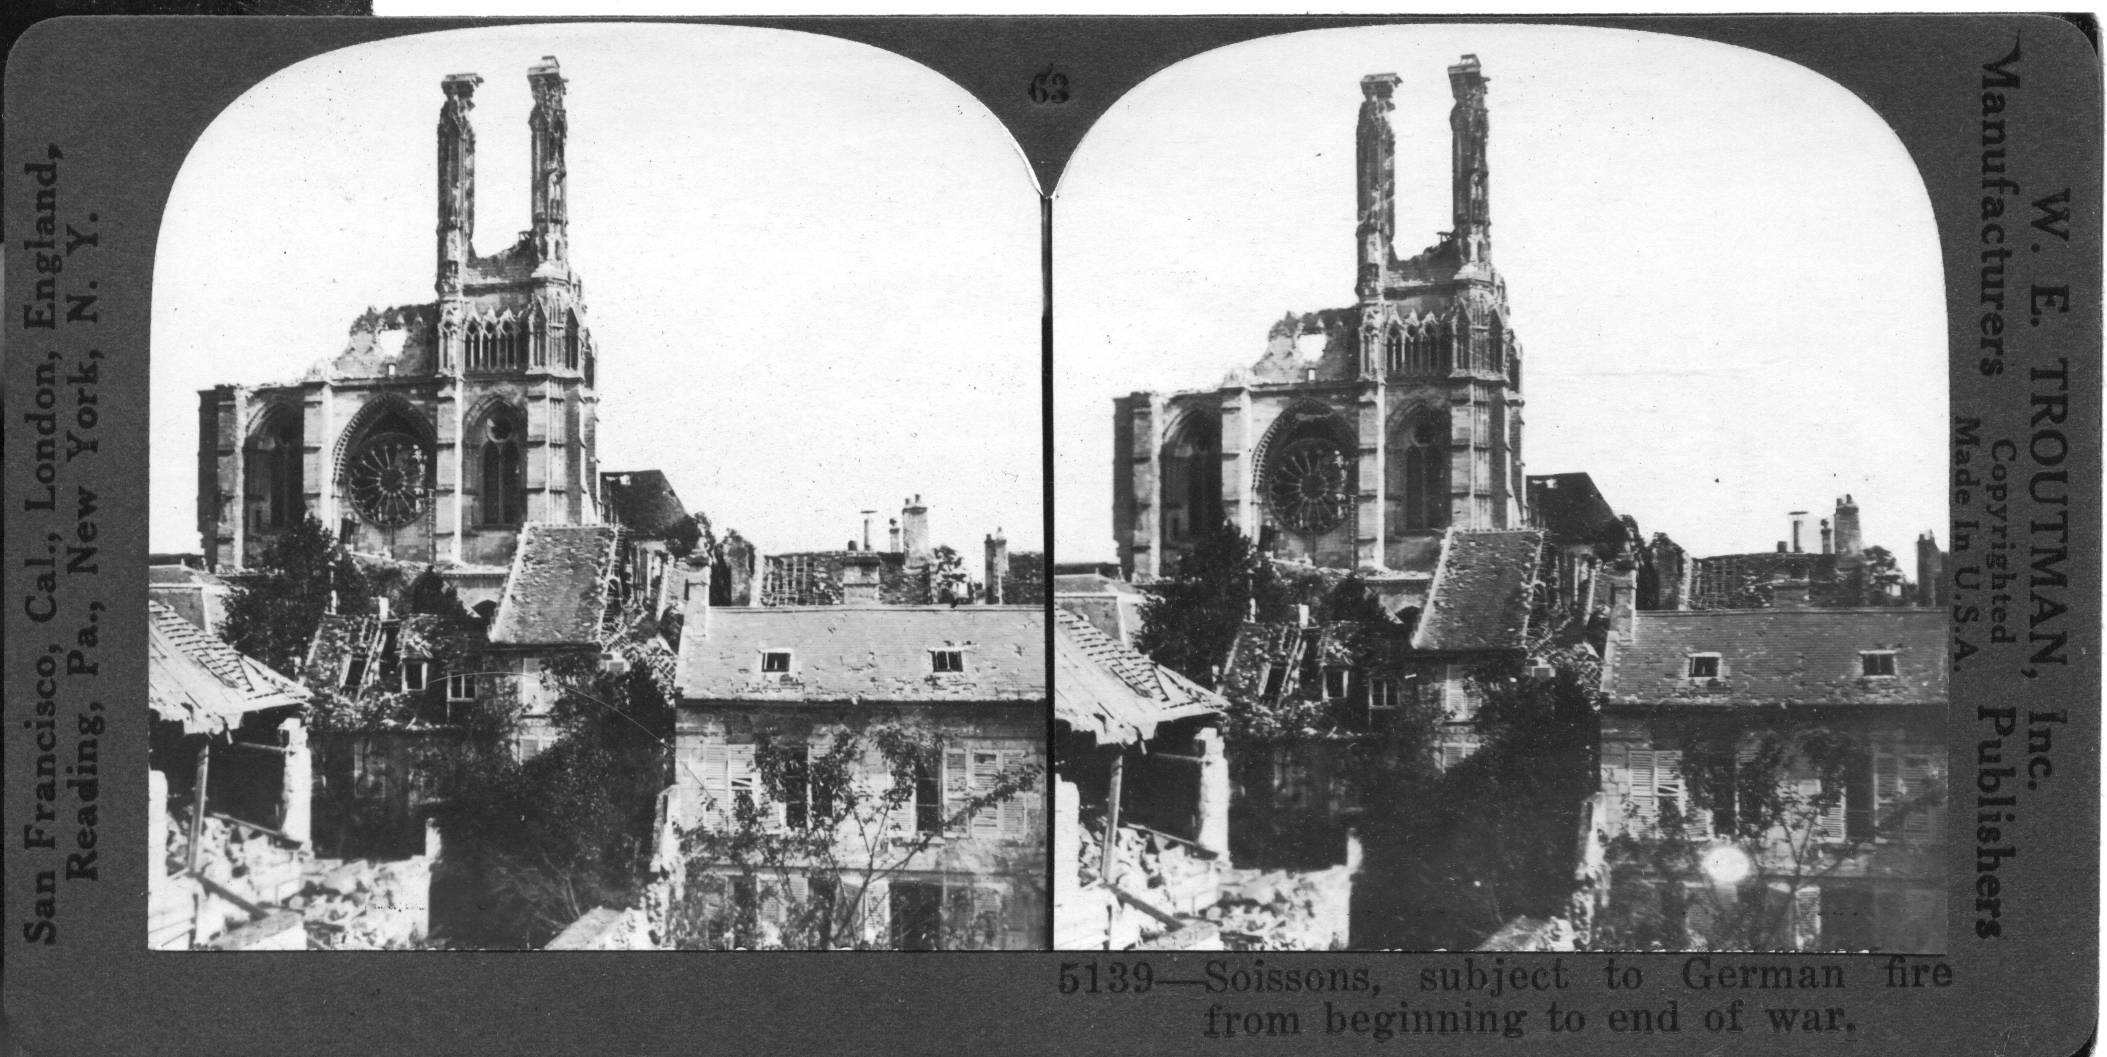 Soissons, subject to German fire from beginning to end of war